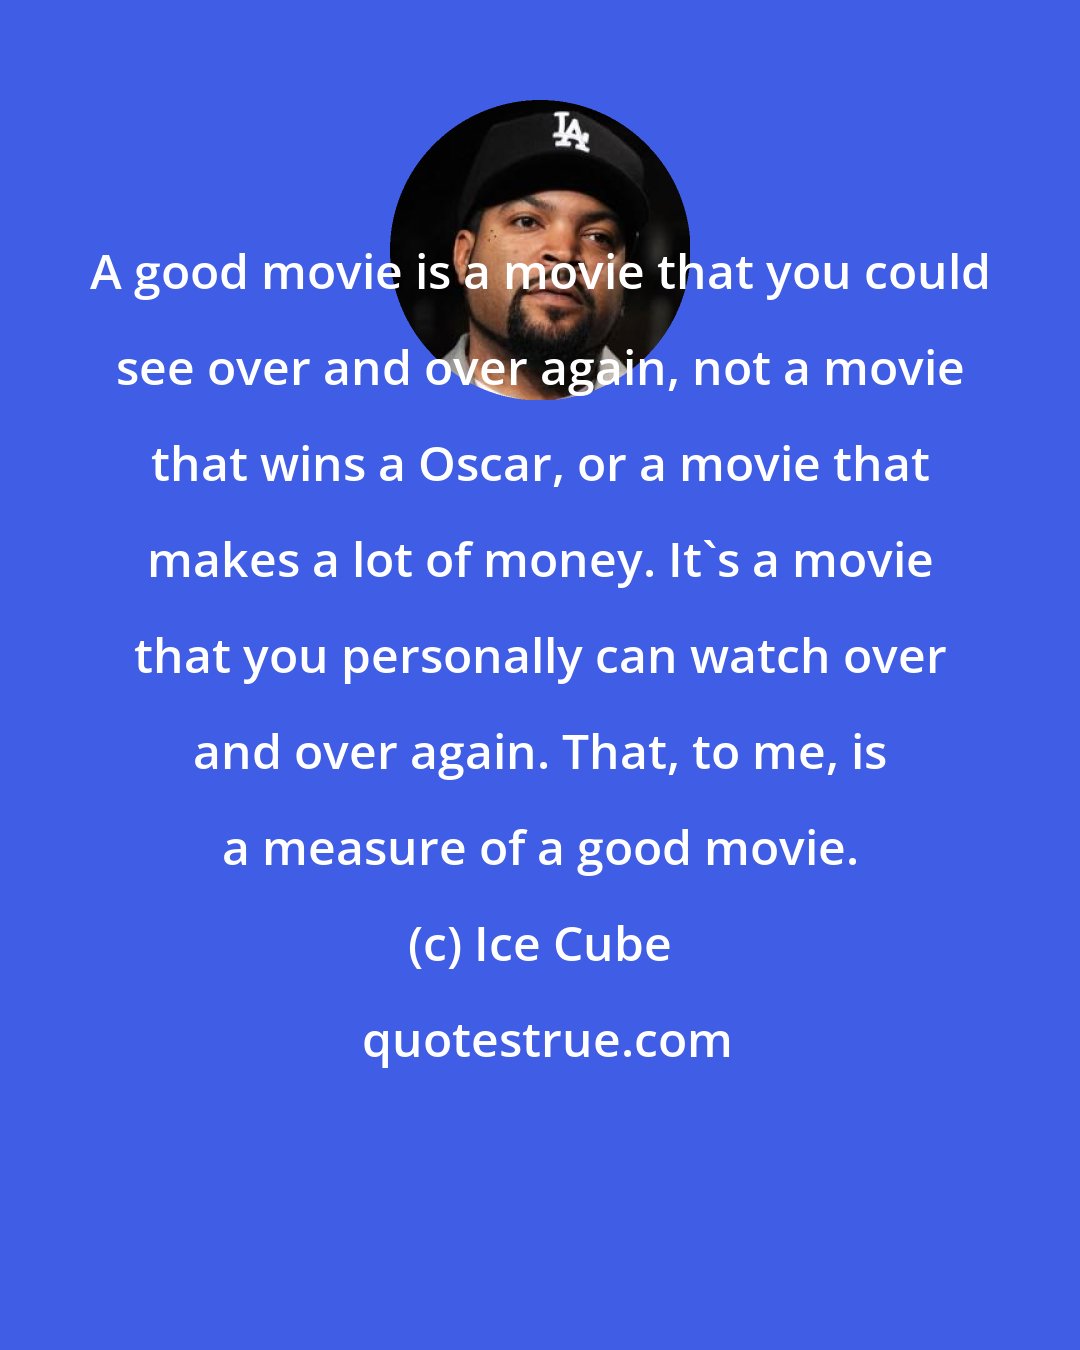 Ice Cube: A good movie is a movie that you could see over and over again, not a movie that wins a Oscar, or a movie that makes a lot of money. It's a movie that you personally can watch over and over again. That, to me, is a measure of a good movie.